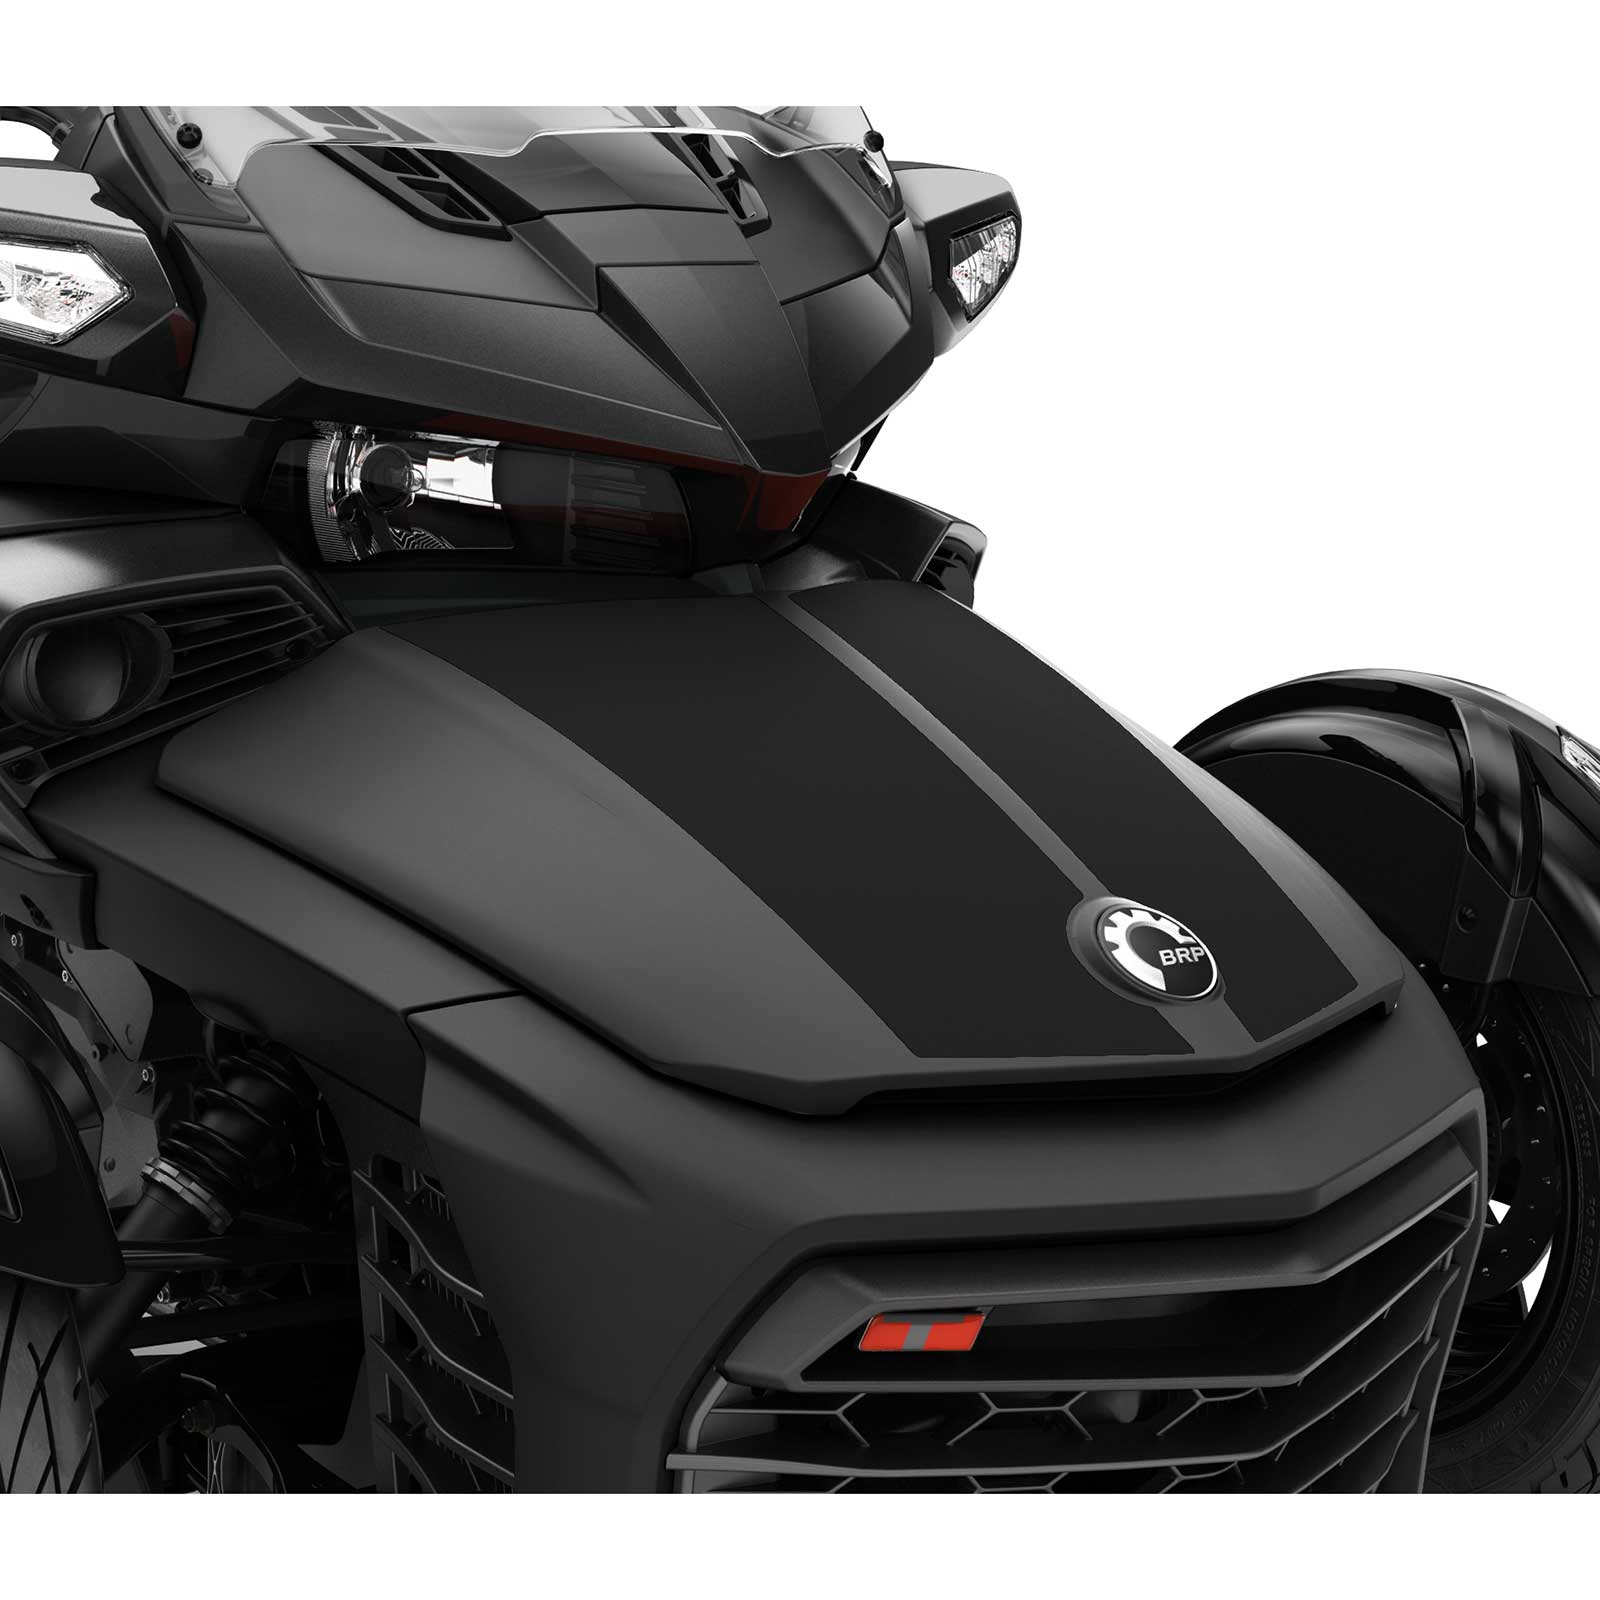 Shop Can-Am Spyder Body & Protection at Factory Recreation